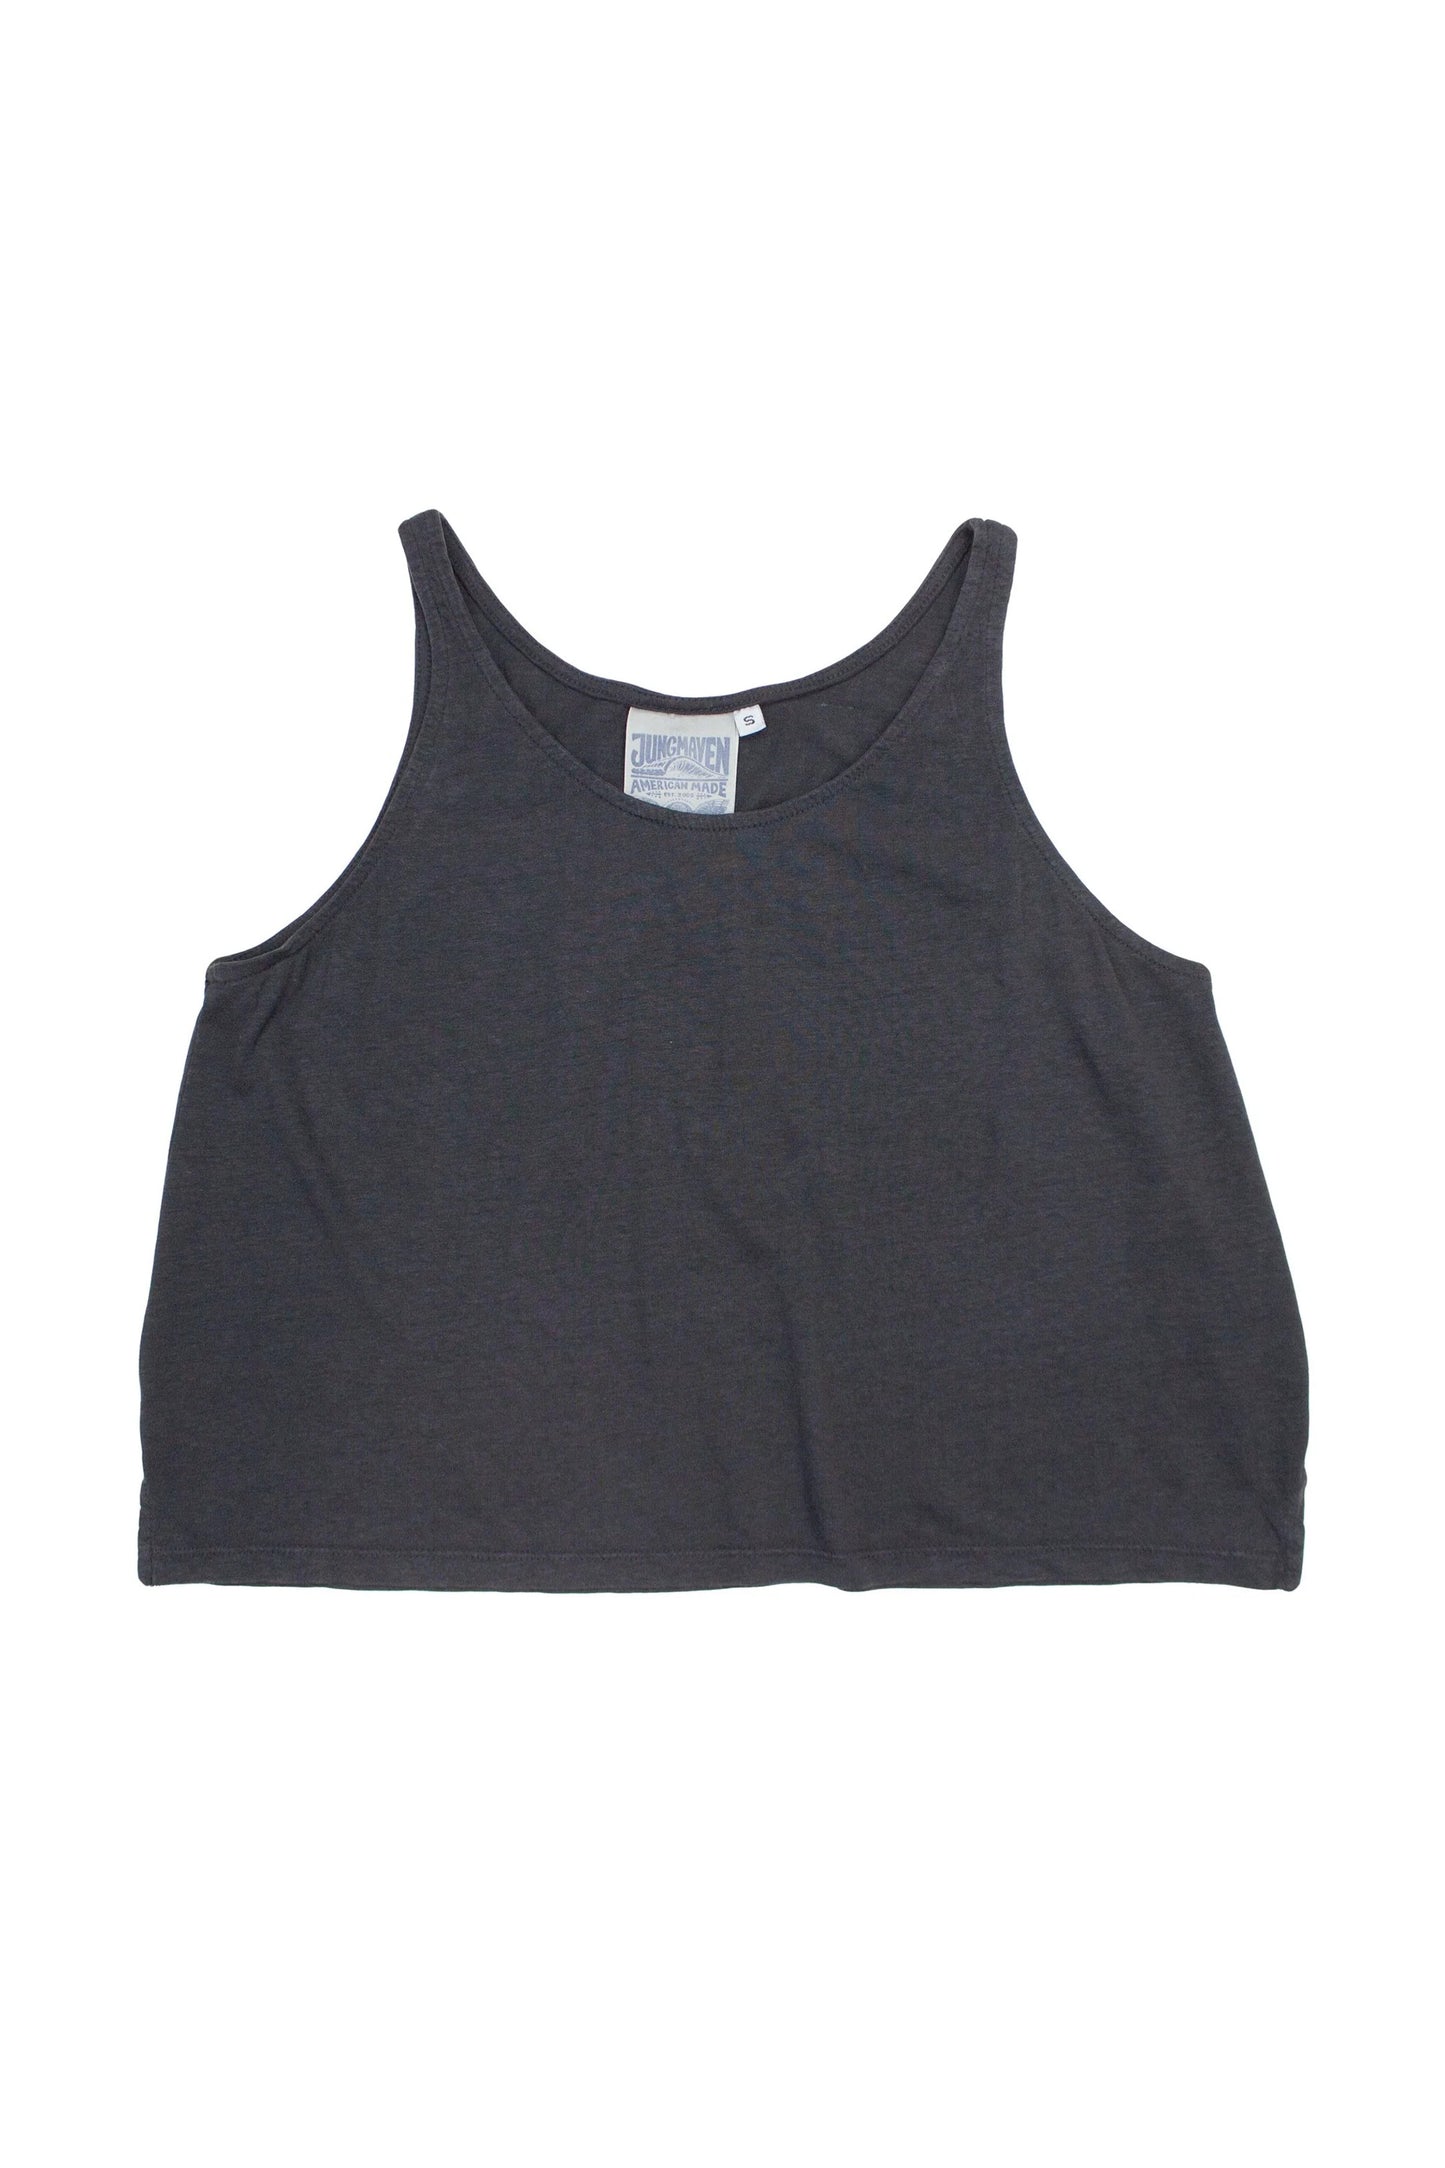 JUNGMAVEN - Sustainable Women's Clothing - Made in USA - Organic Cotton and Hemp Blend Cropped Tank in Washed Black